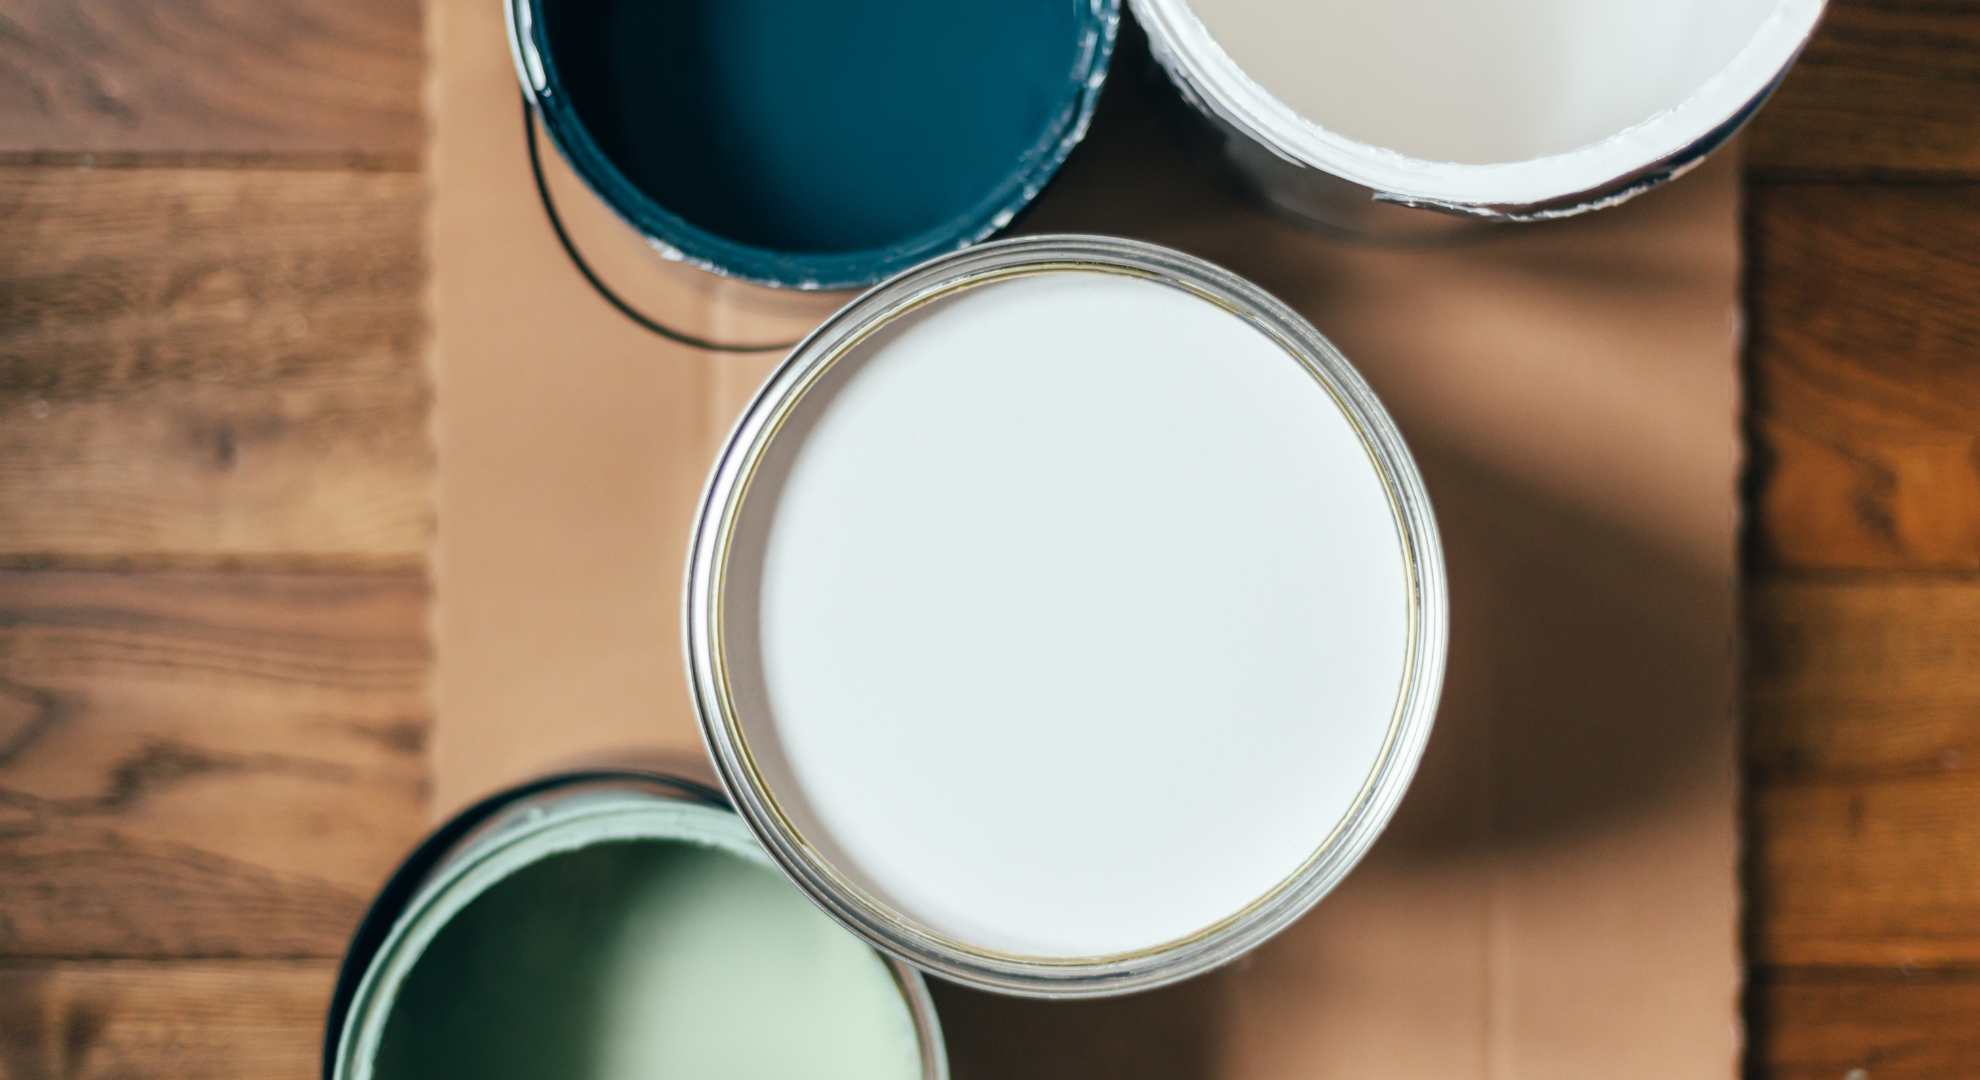 Image of paint cans